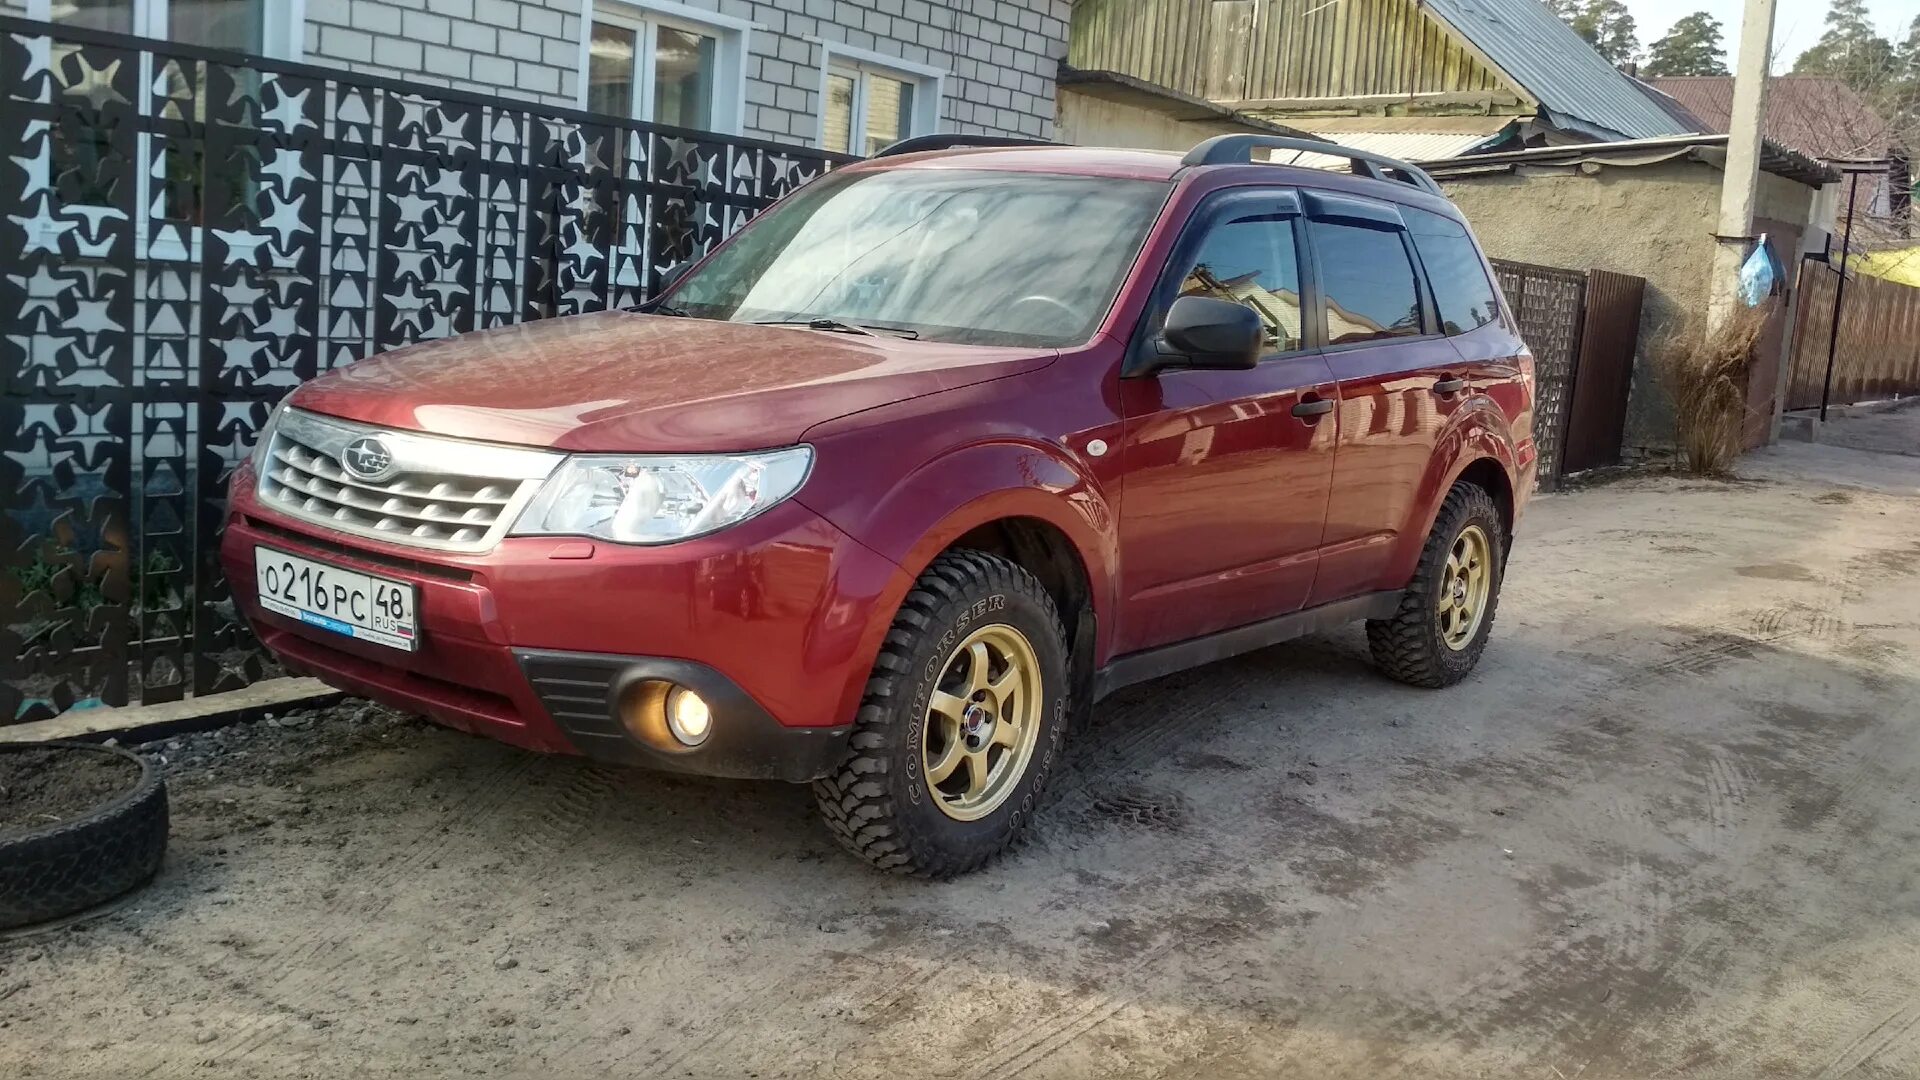 Forester 215 75 15. 215/75 R15 на Форестер. 215/75 R15 Forester SG. Forester sh 215 70 16. 215 75 15 летние